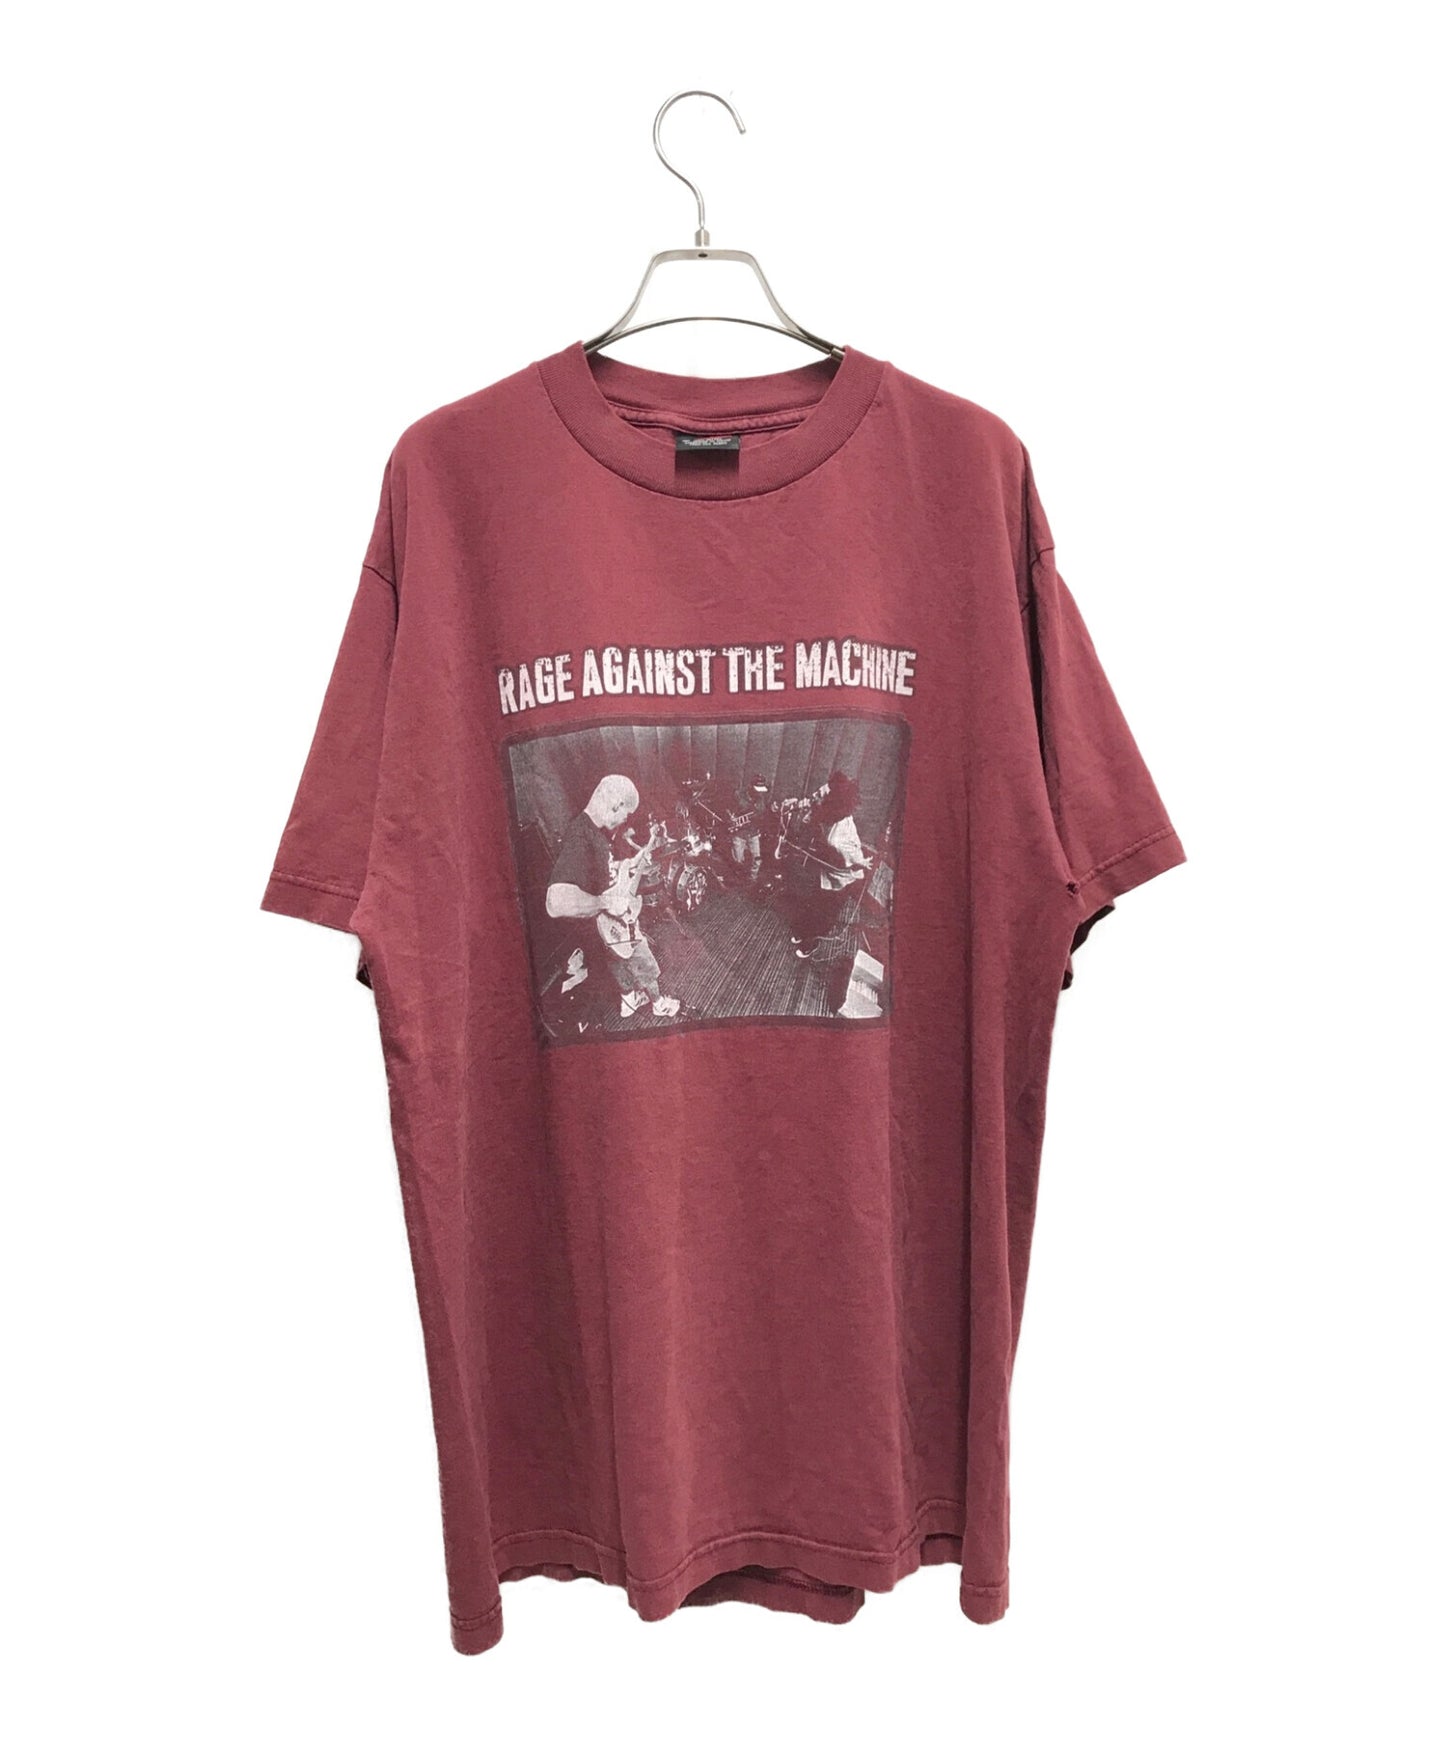 90s Rage against the machine Tシャツvintage - Tシャツ/カットソー ...